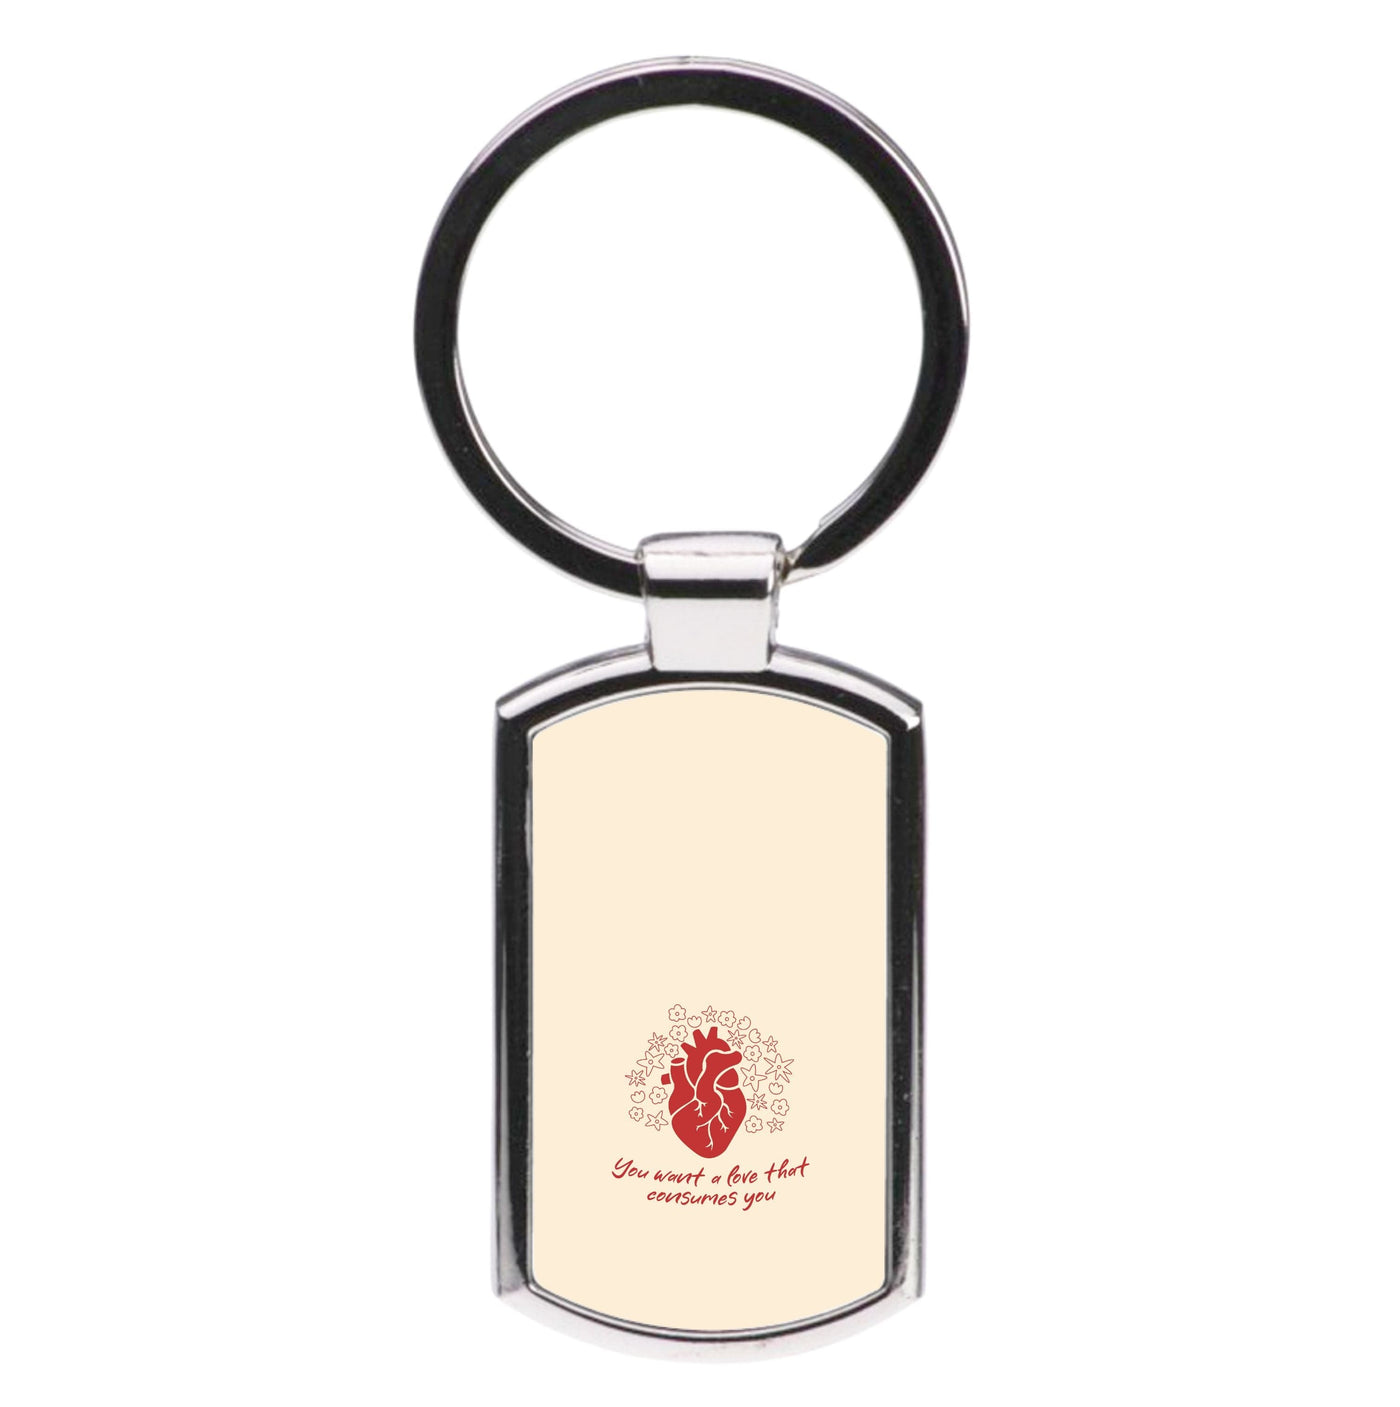 You Want A Love That Consumes You - Vampire Diaries Luxury Keyring